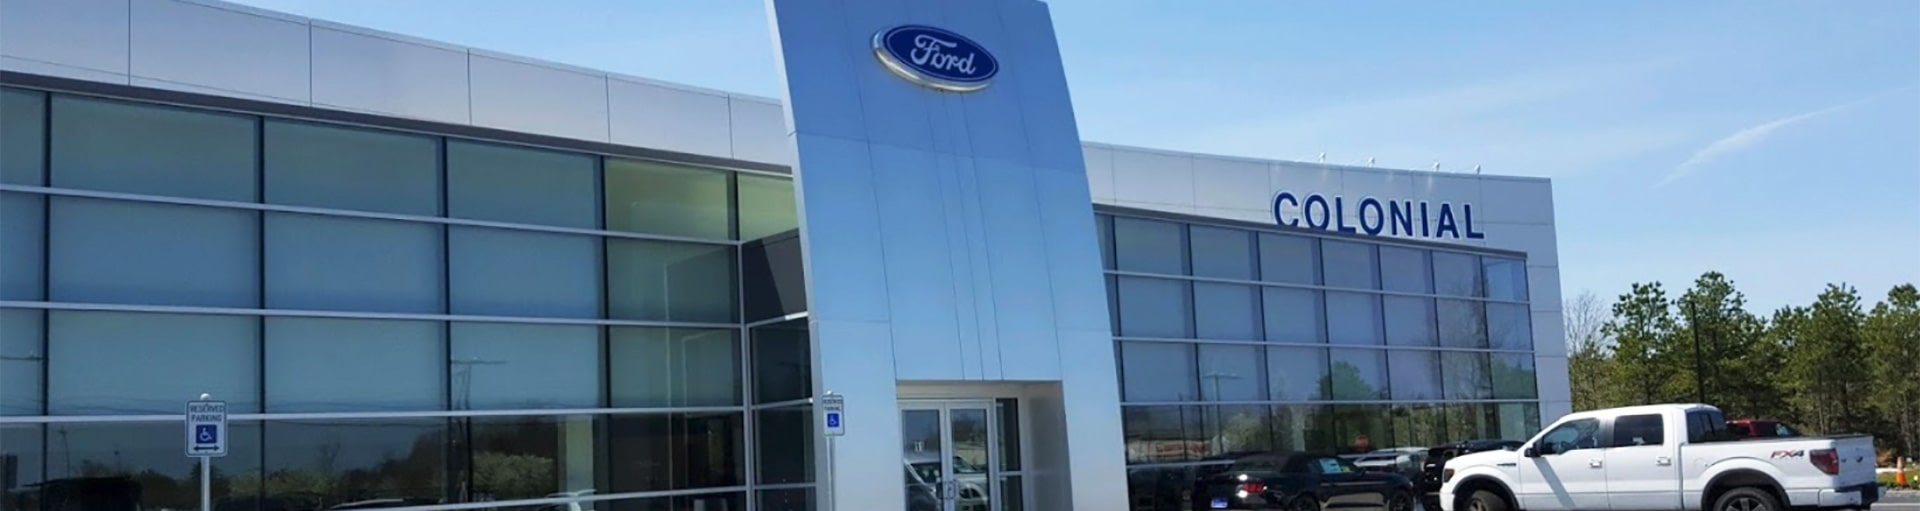 Colonial Ford of Plymouth Service Department